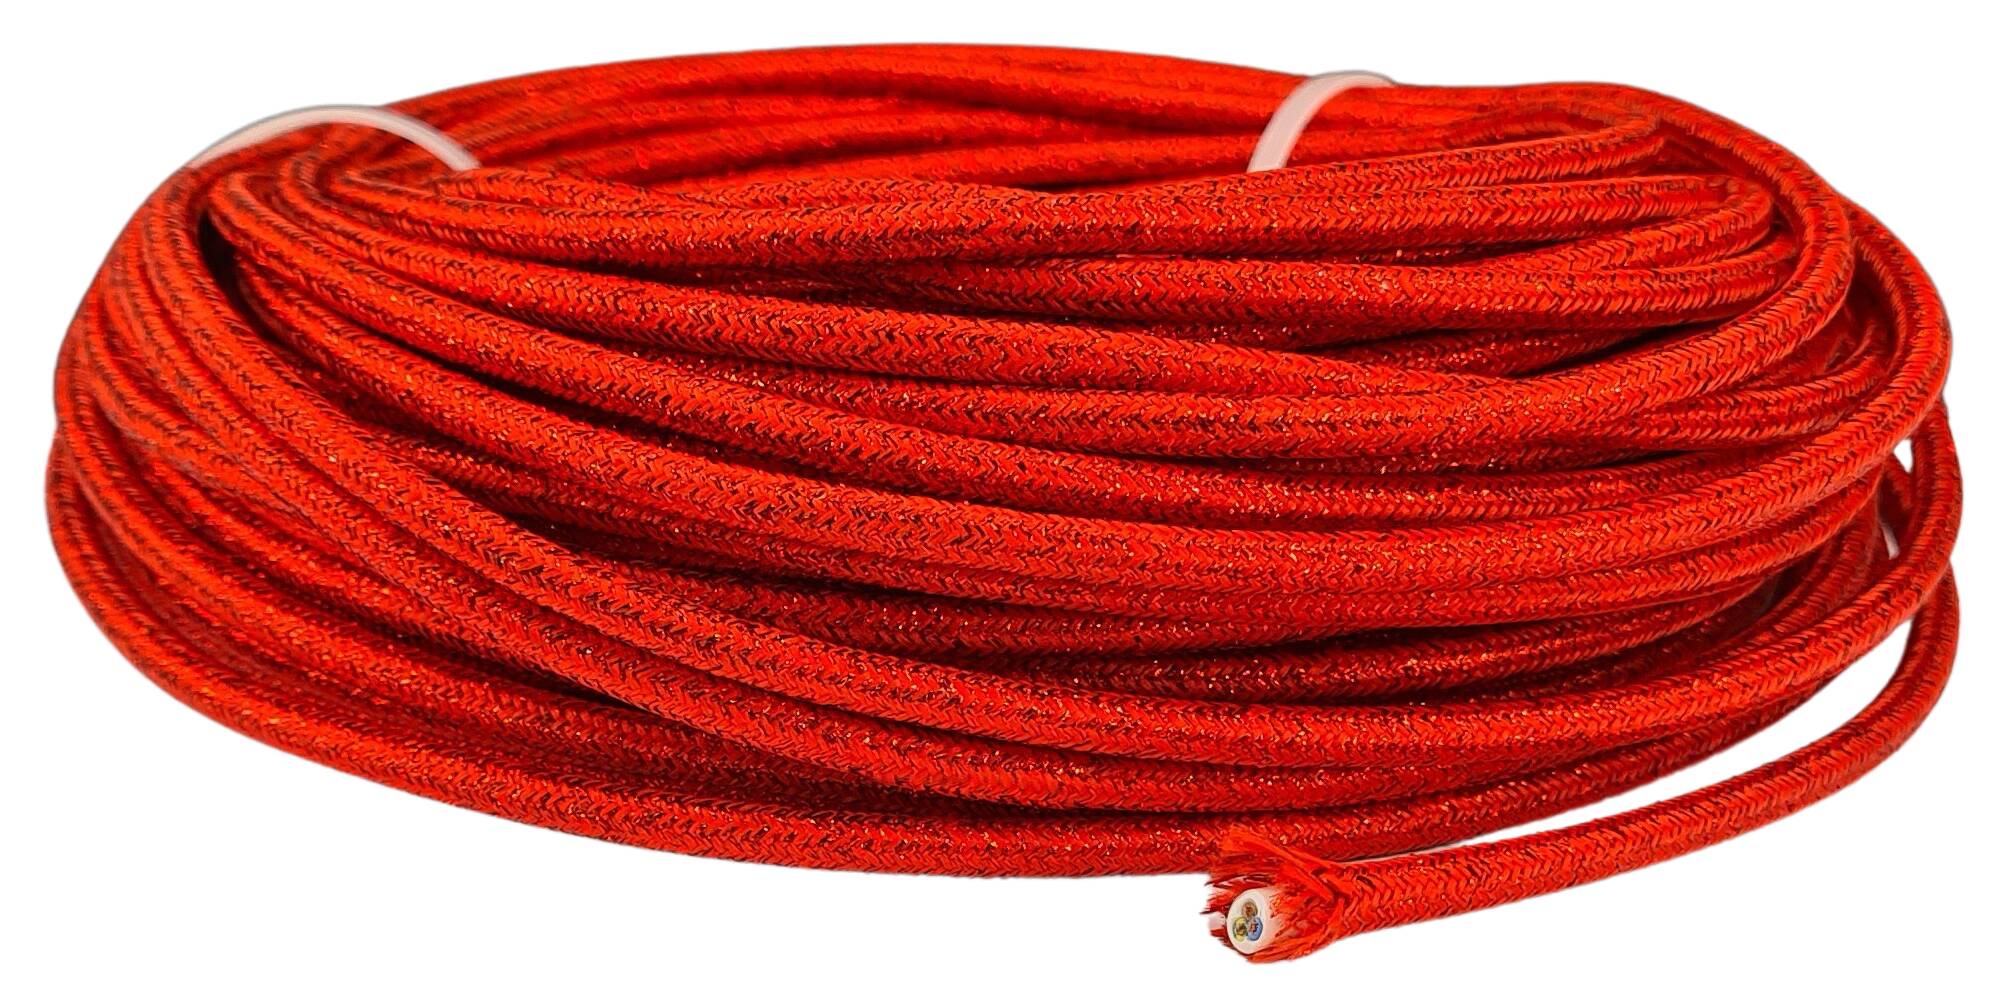 cable 3G 0,75 H03VV-F textile braided metallic RAL 3028 rot